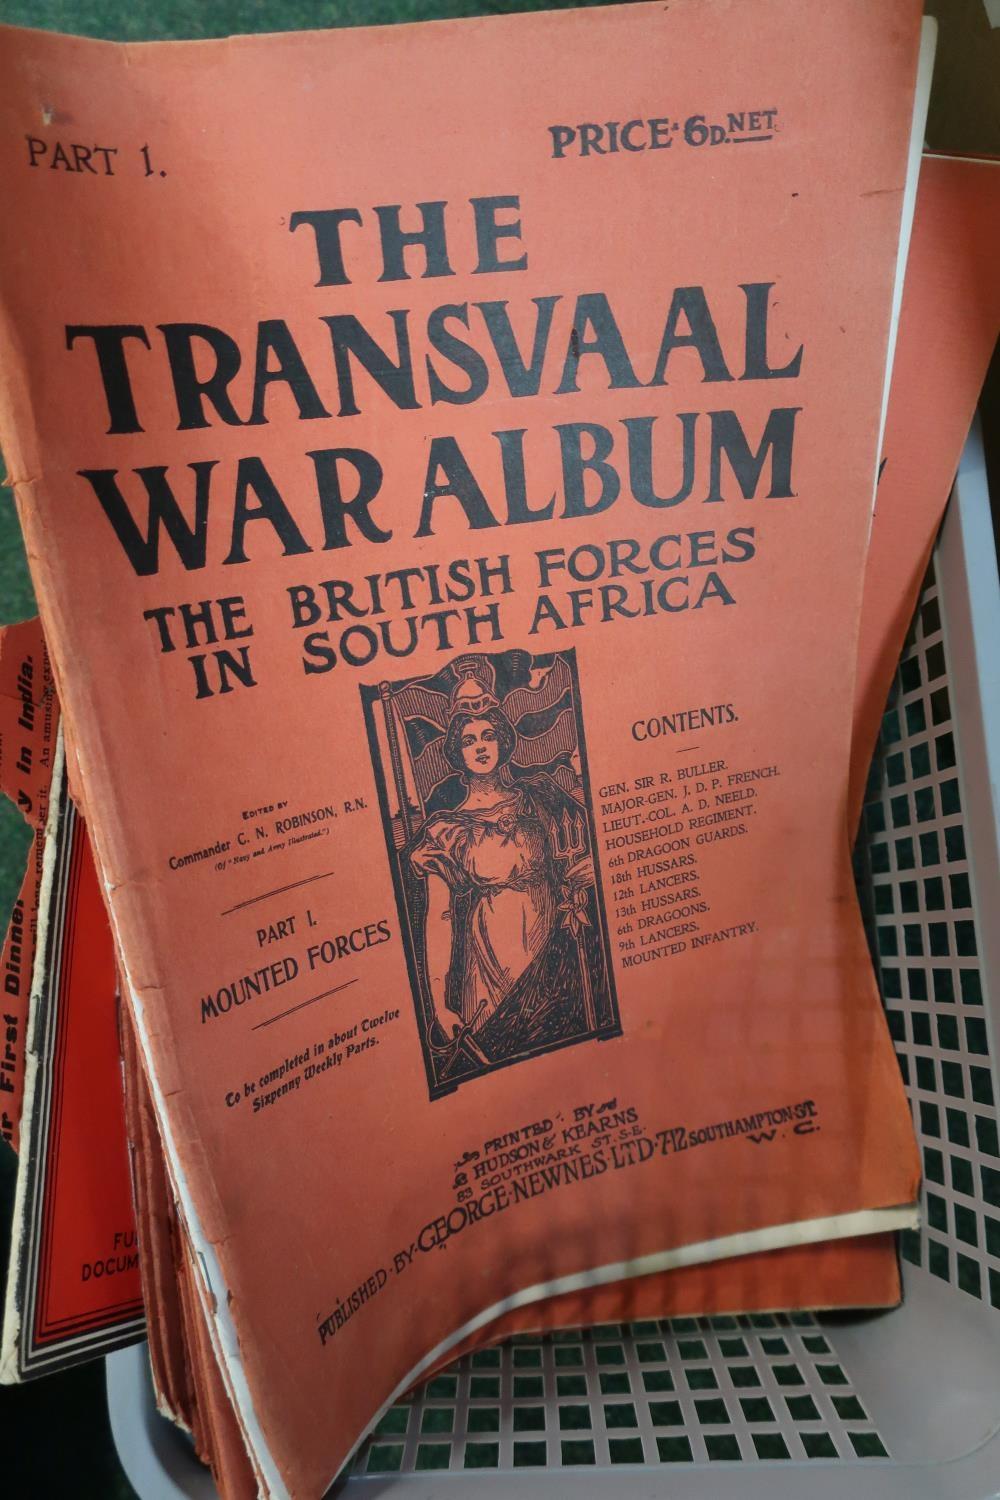 Selection of Transvaal War Albums from George News Ltd, The Second Great War, and other similar